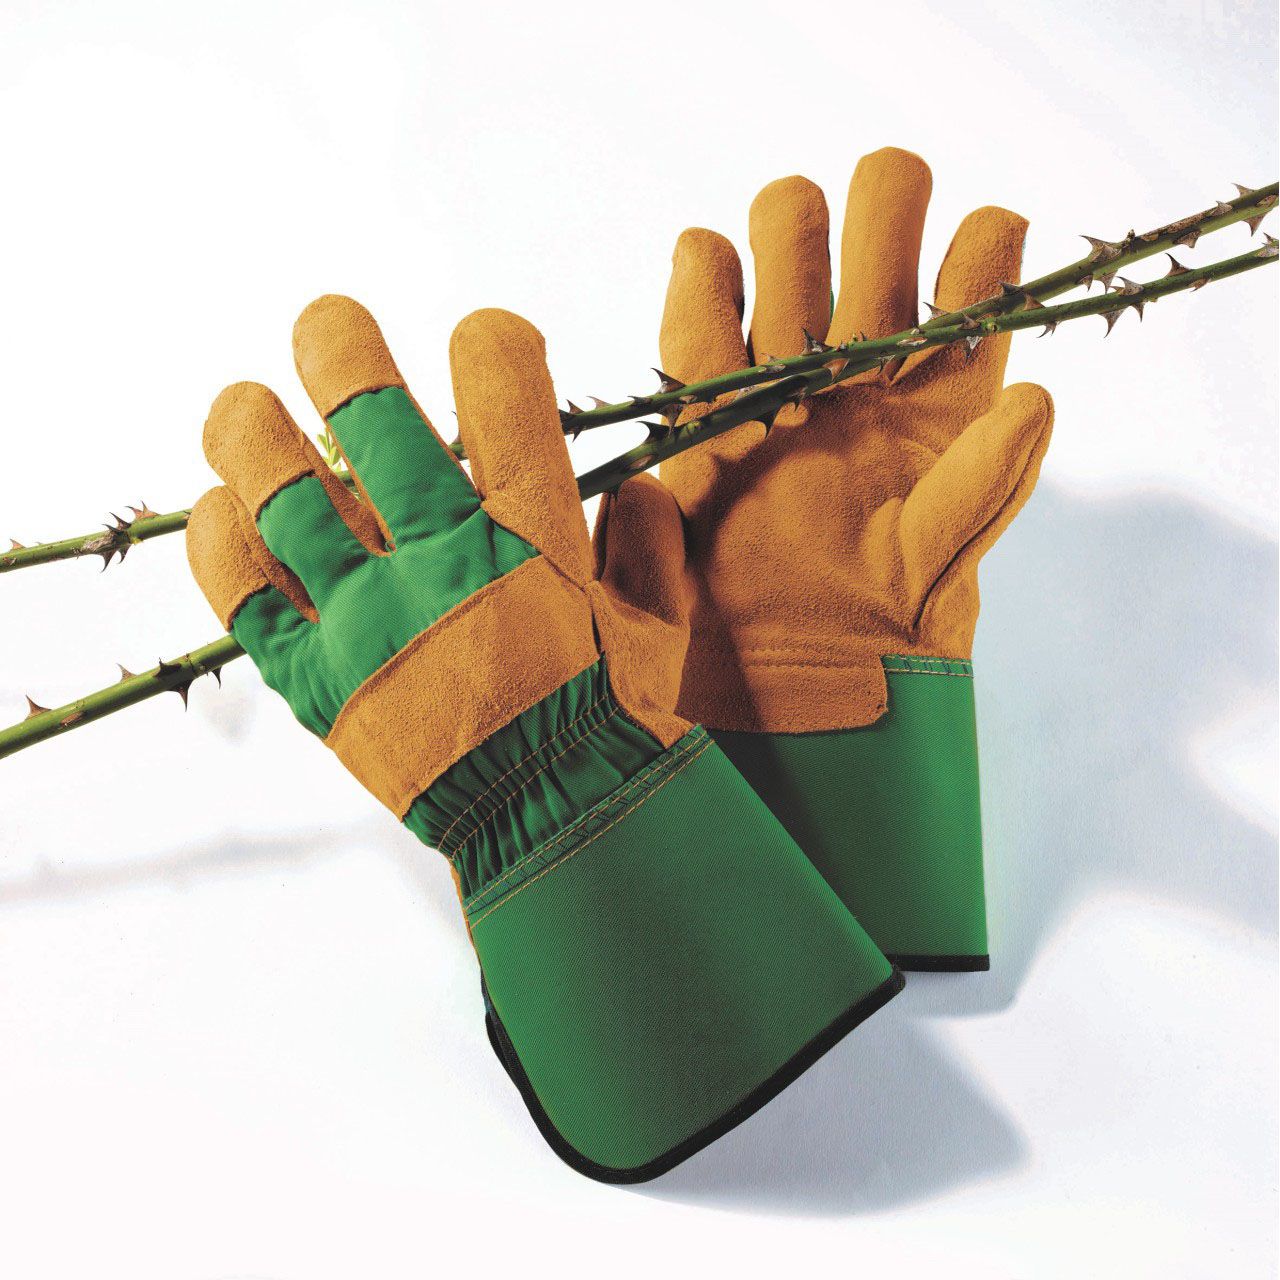 Thornproof Leather Gloves